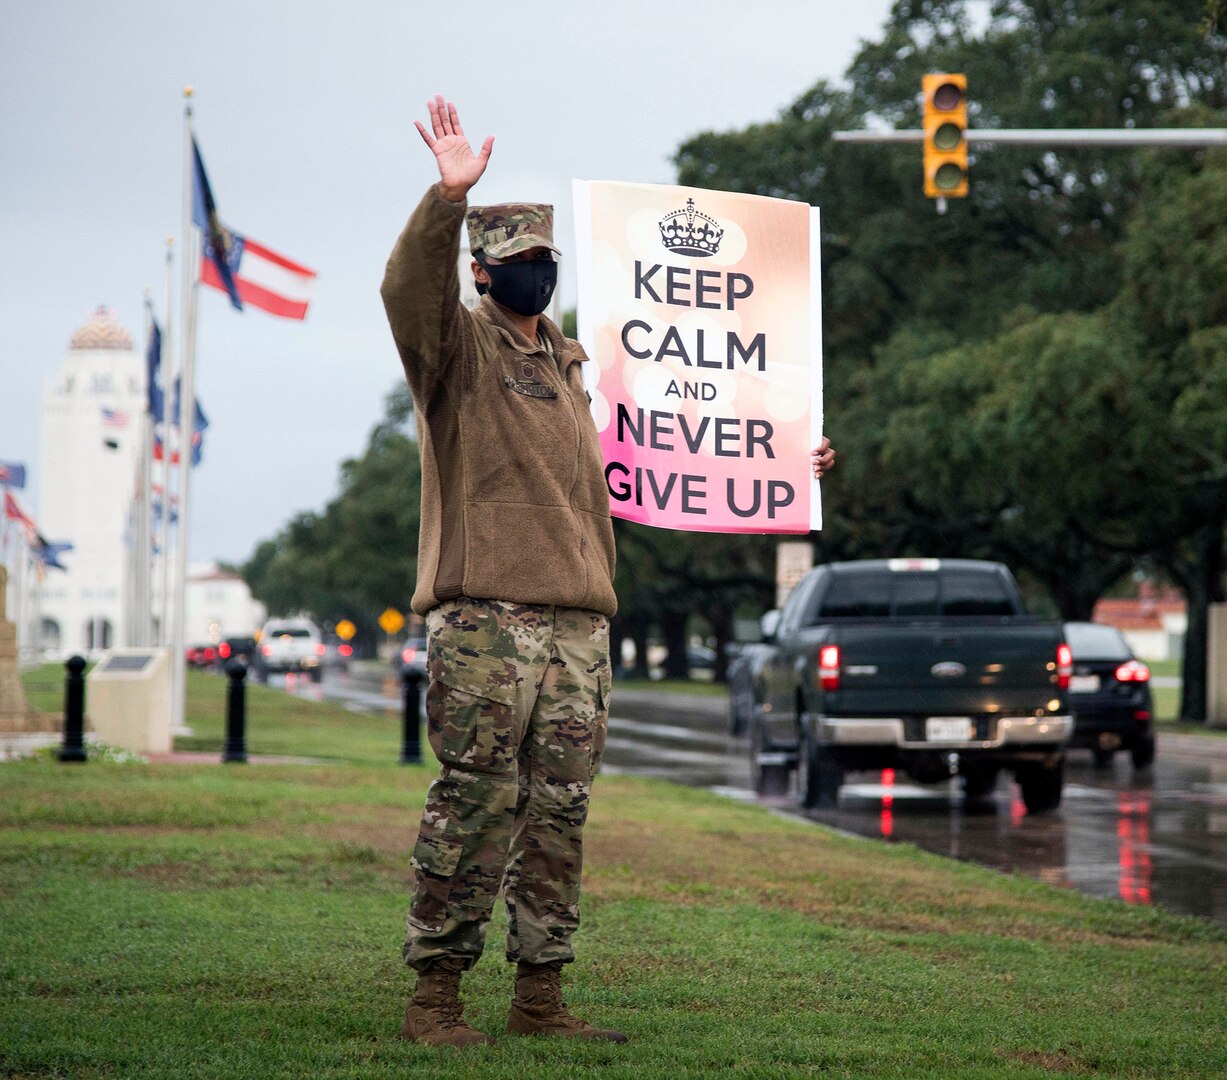 Master Sgt. Tiffany Arrington, 12th Operations Group first sergeant, waves at people driving past her during the “We Care” event at Joint Base San Antonio-Randolph Sept. 10.